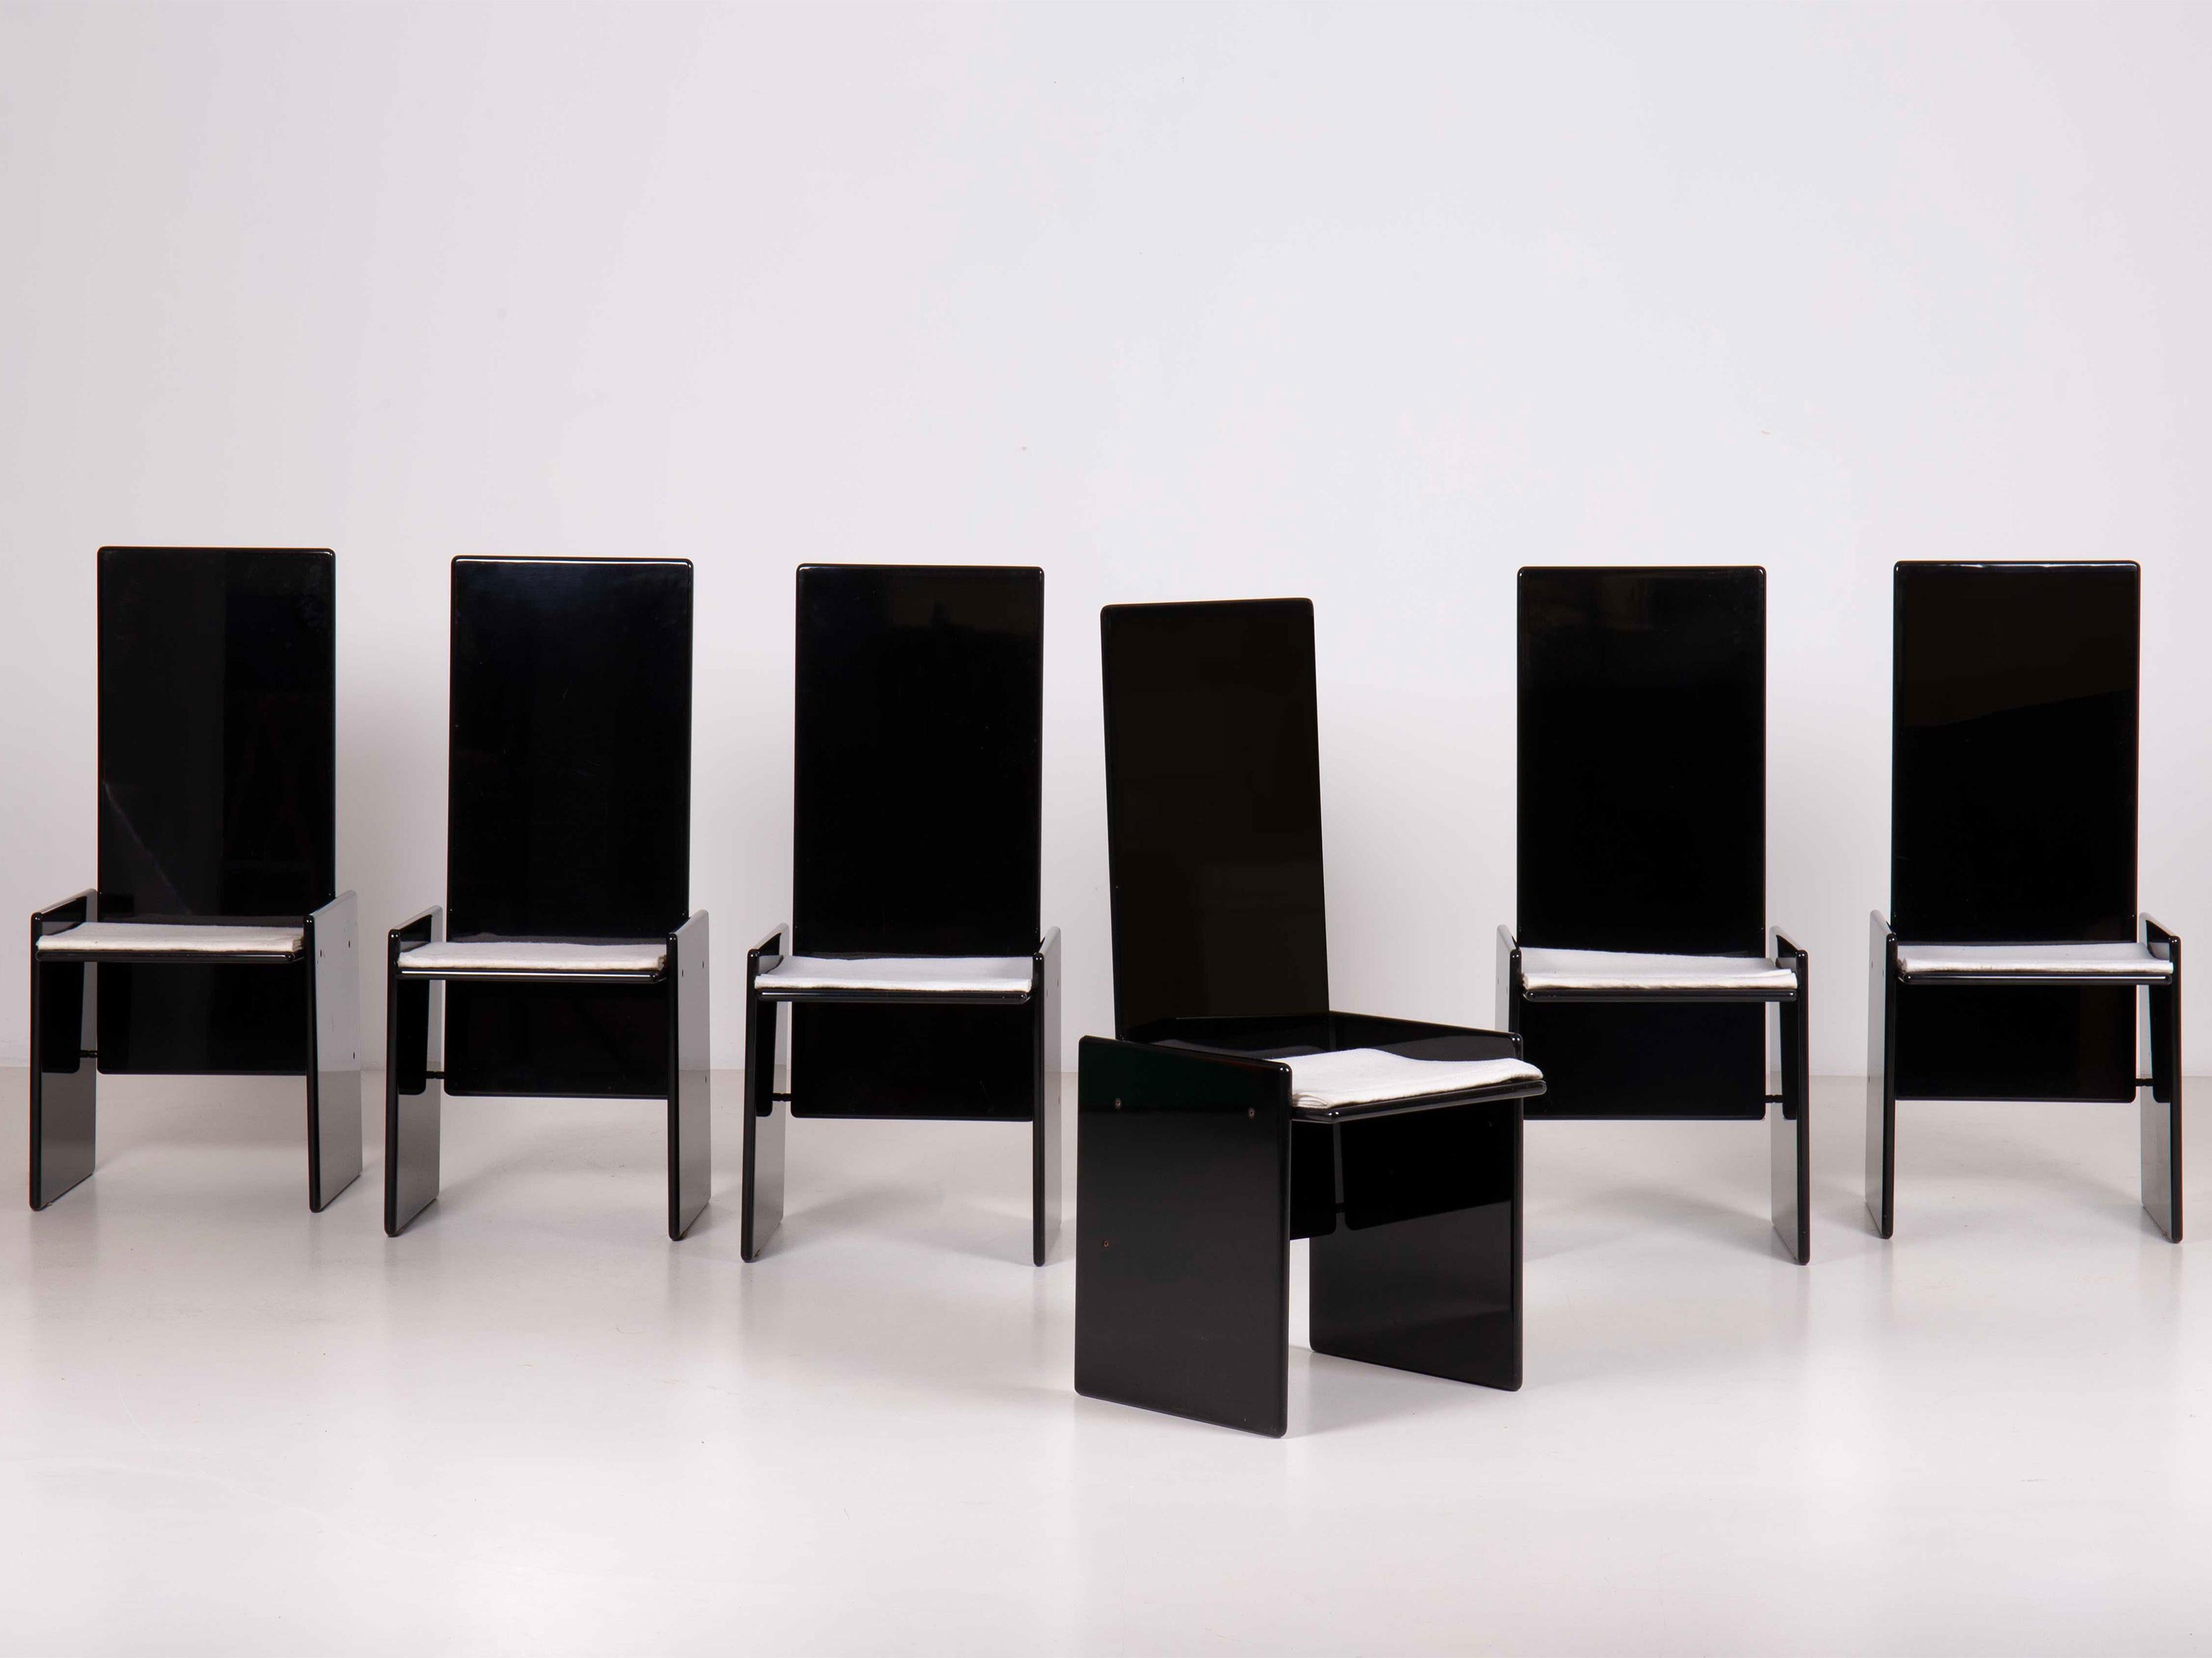 Set of 6 Kazuki chairs designed by Kazuhide Takahama.
Structure in glossy lacquered wood, seat cushion in felt folded as the ancient Greeks used to.
The first glossy lacquered modern mass-produced piece of furniture; a timeless chair with slightly